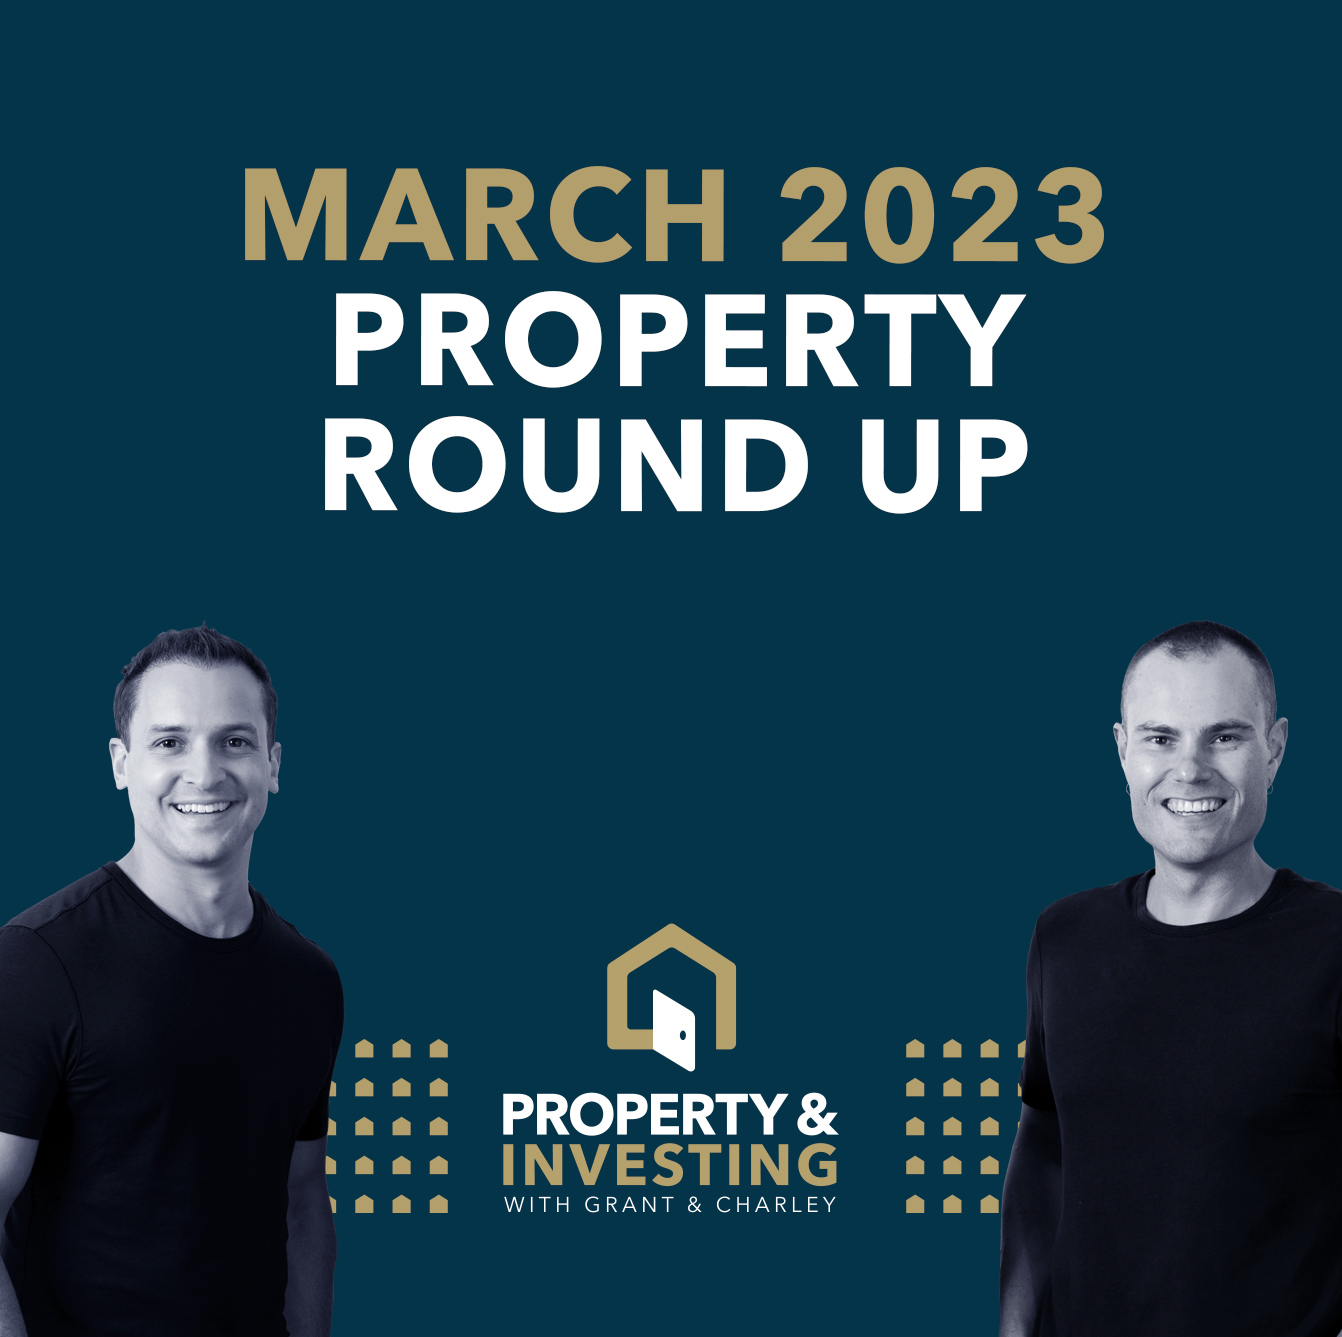 March 2023 Property Round Up